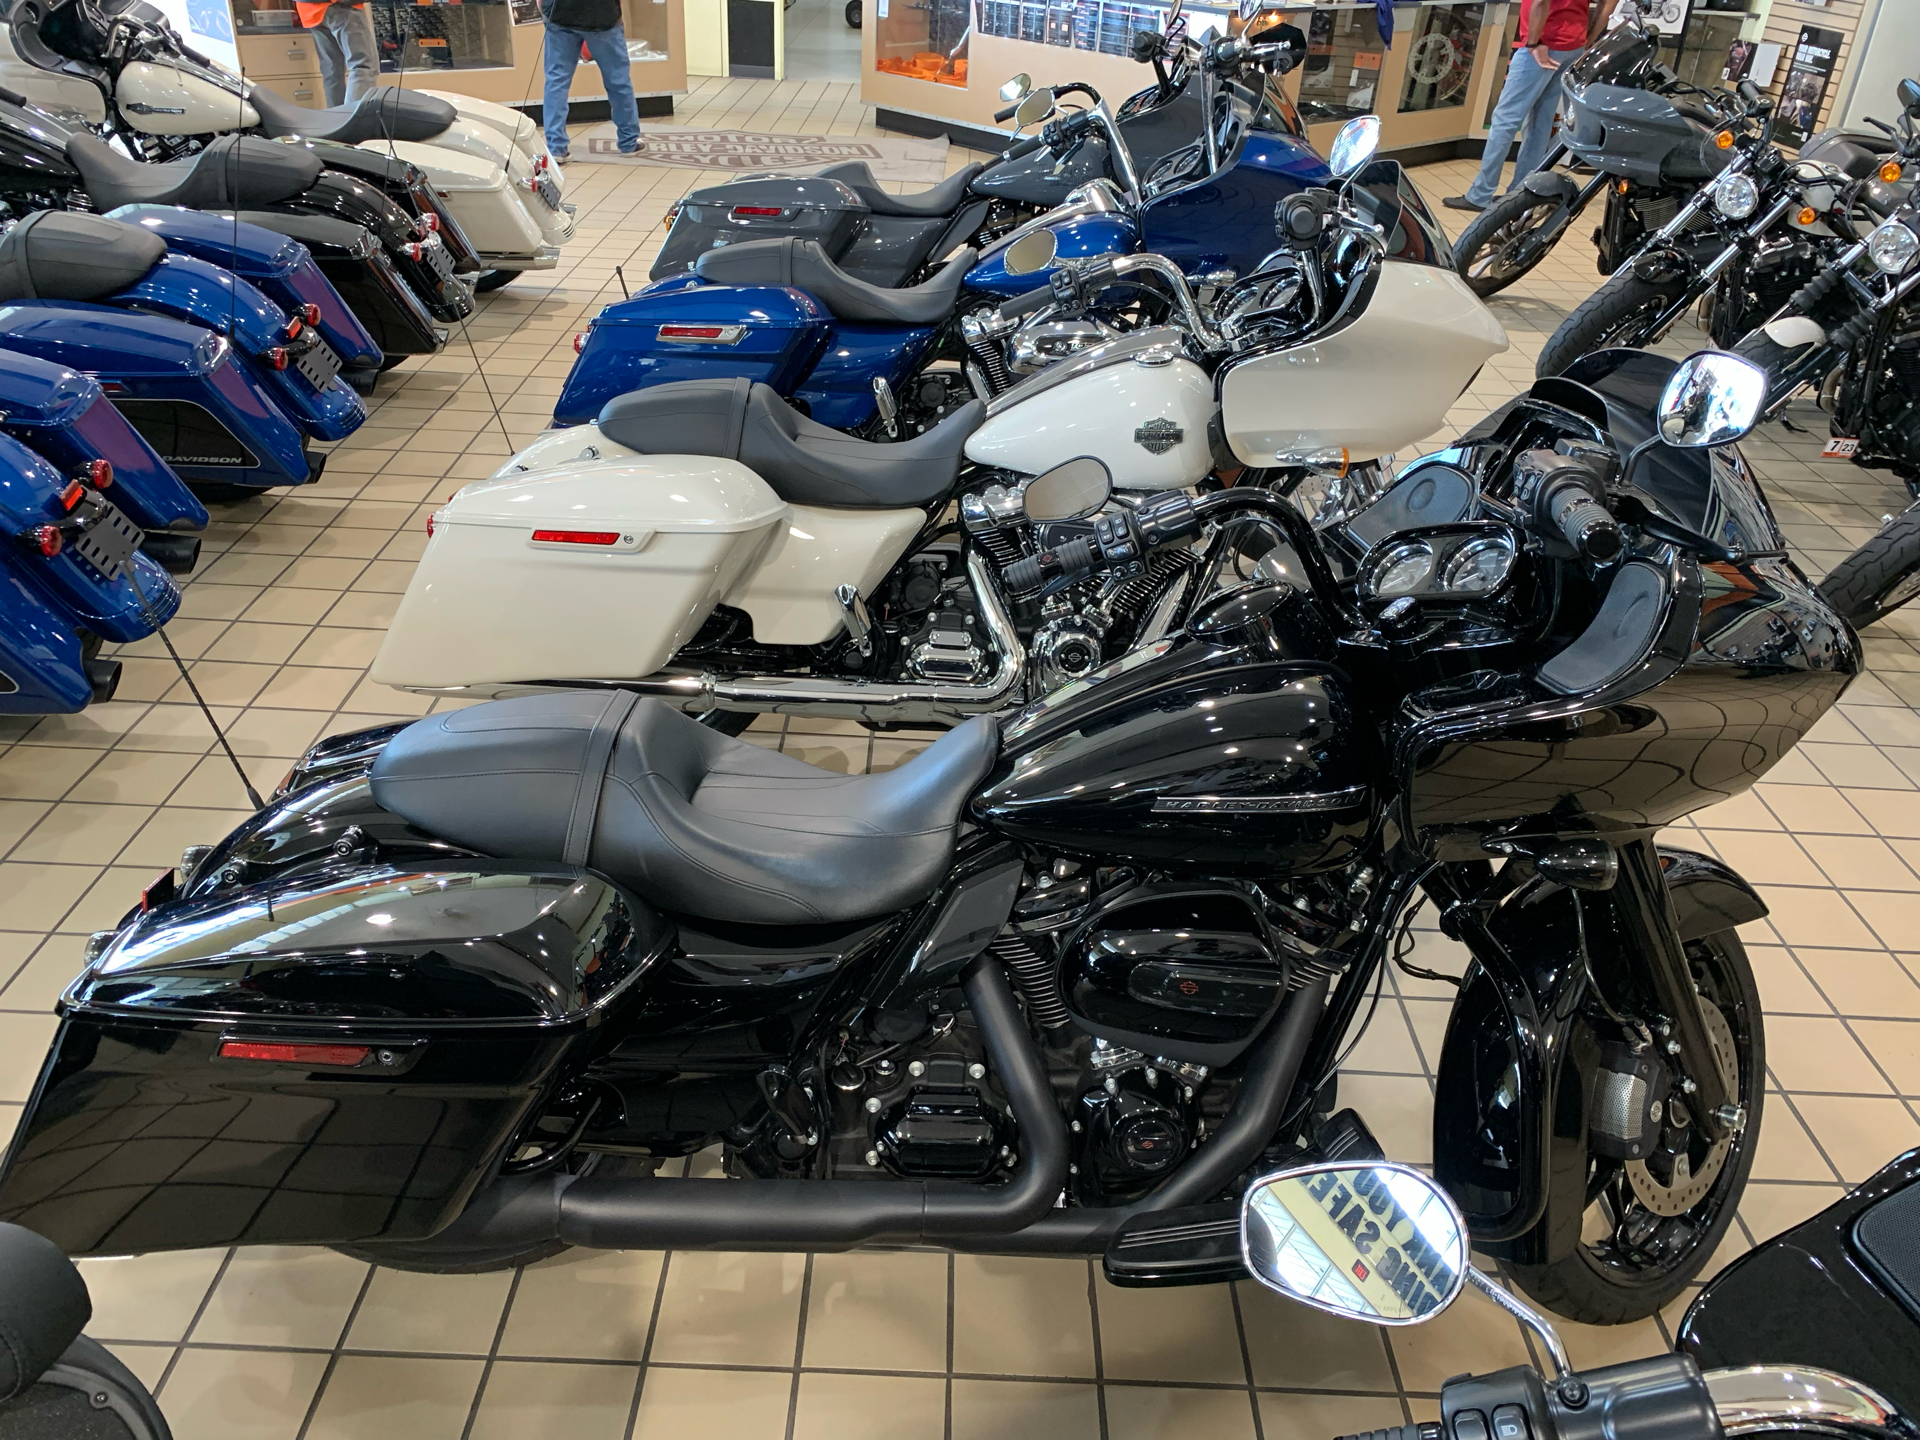 2020 Harley-Davidson ROAD GLIDE SPECIAL in Dumfries, Virginia - Photo 1